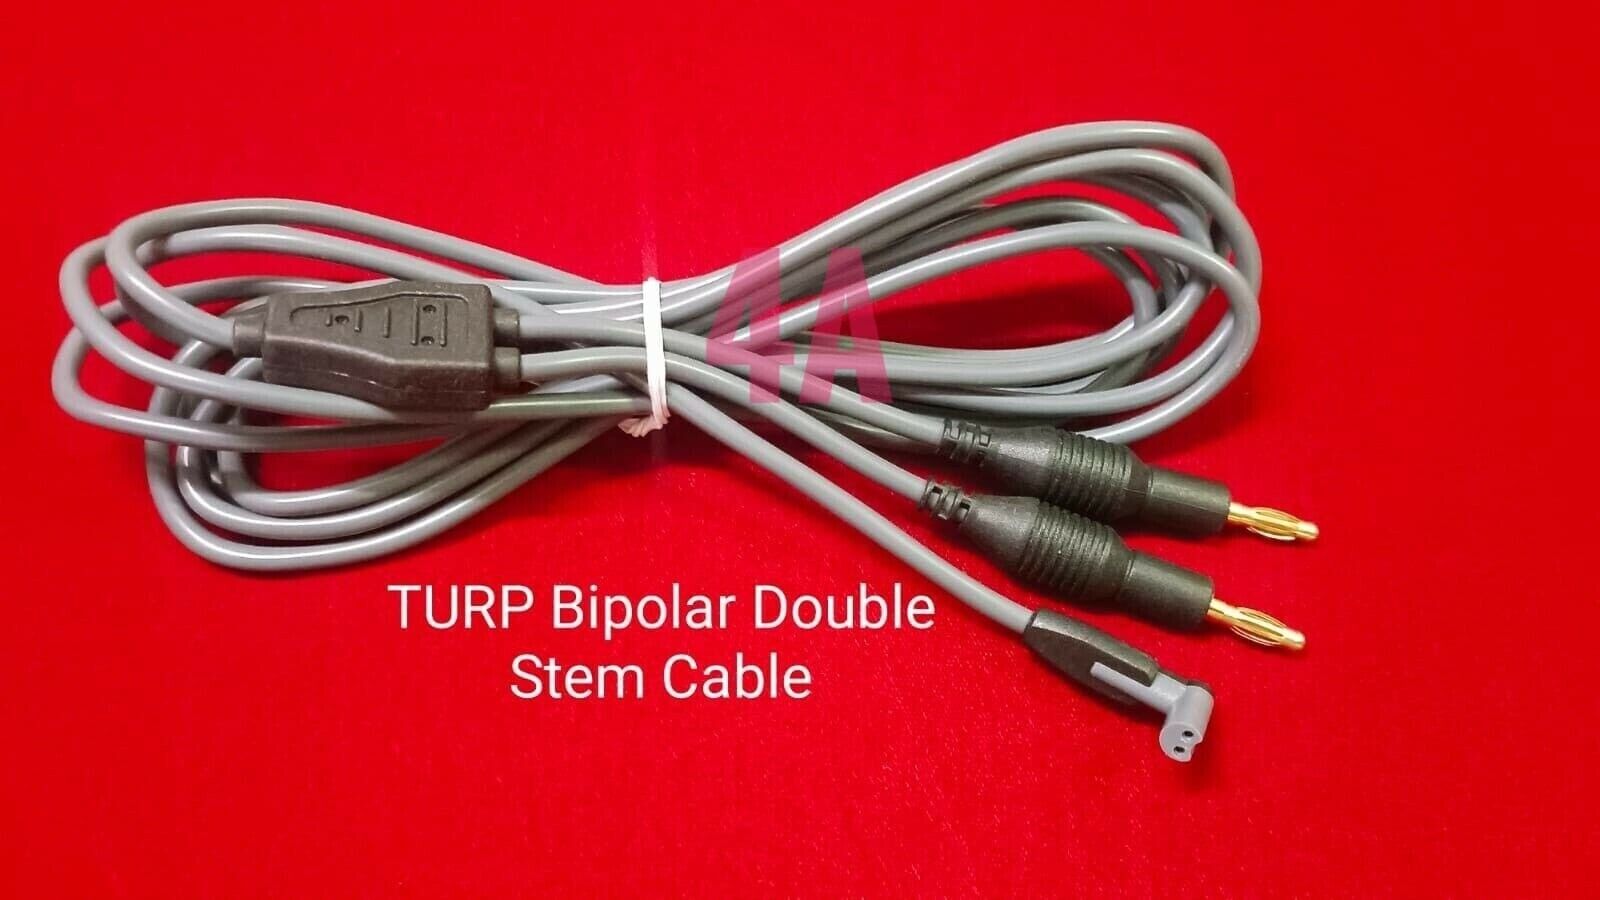 4A BIPOLAR TURP HIGH FREQUENCY DOUBLE STEM CABLE